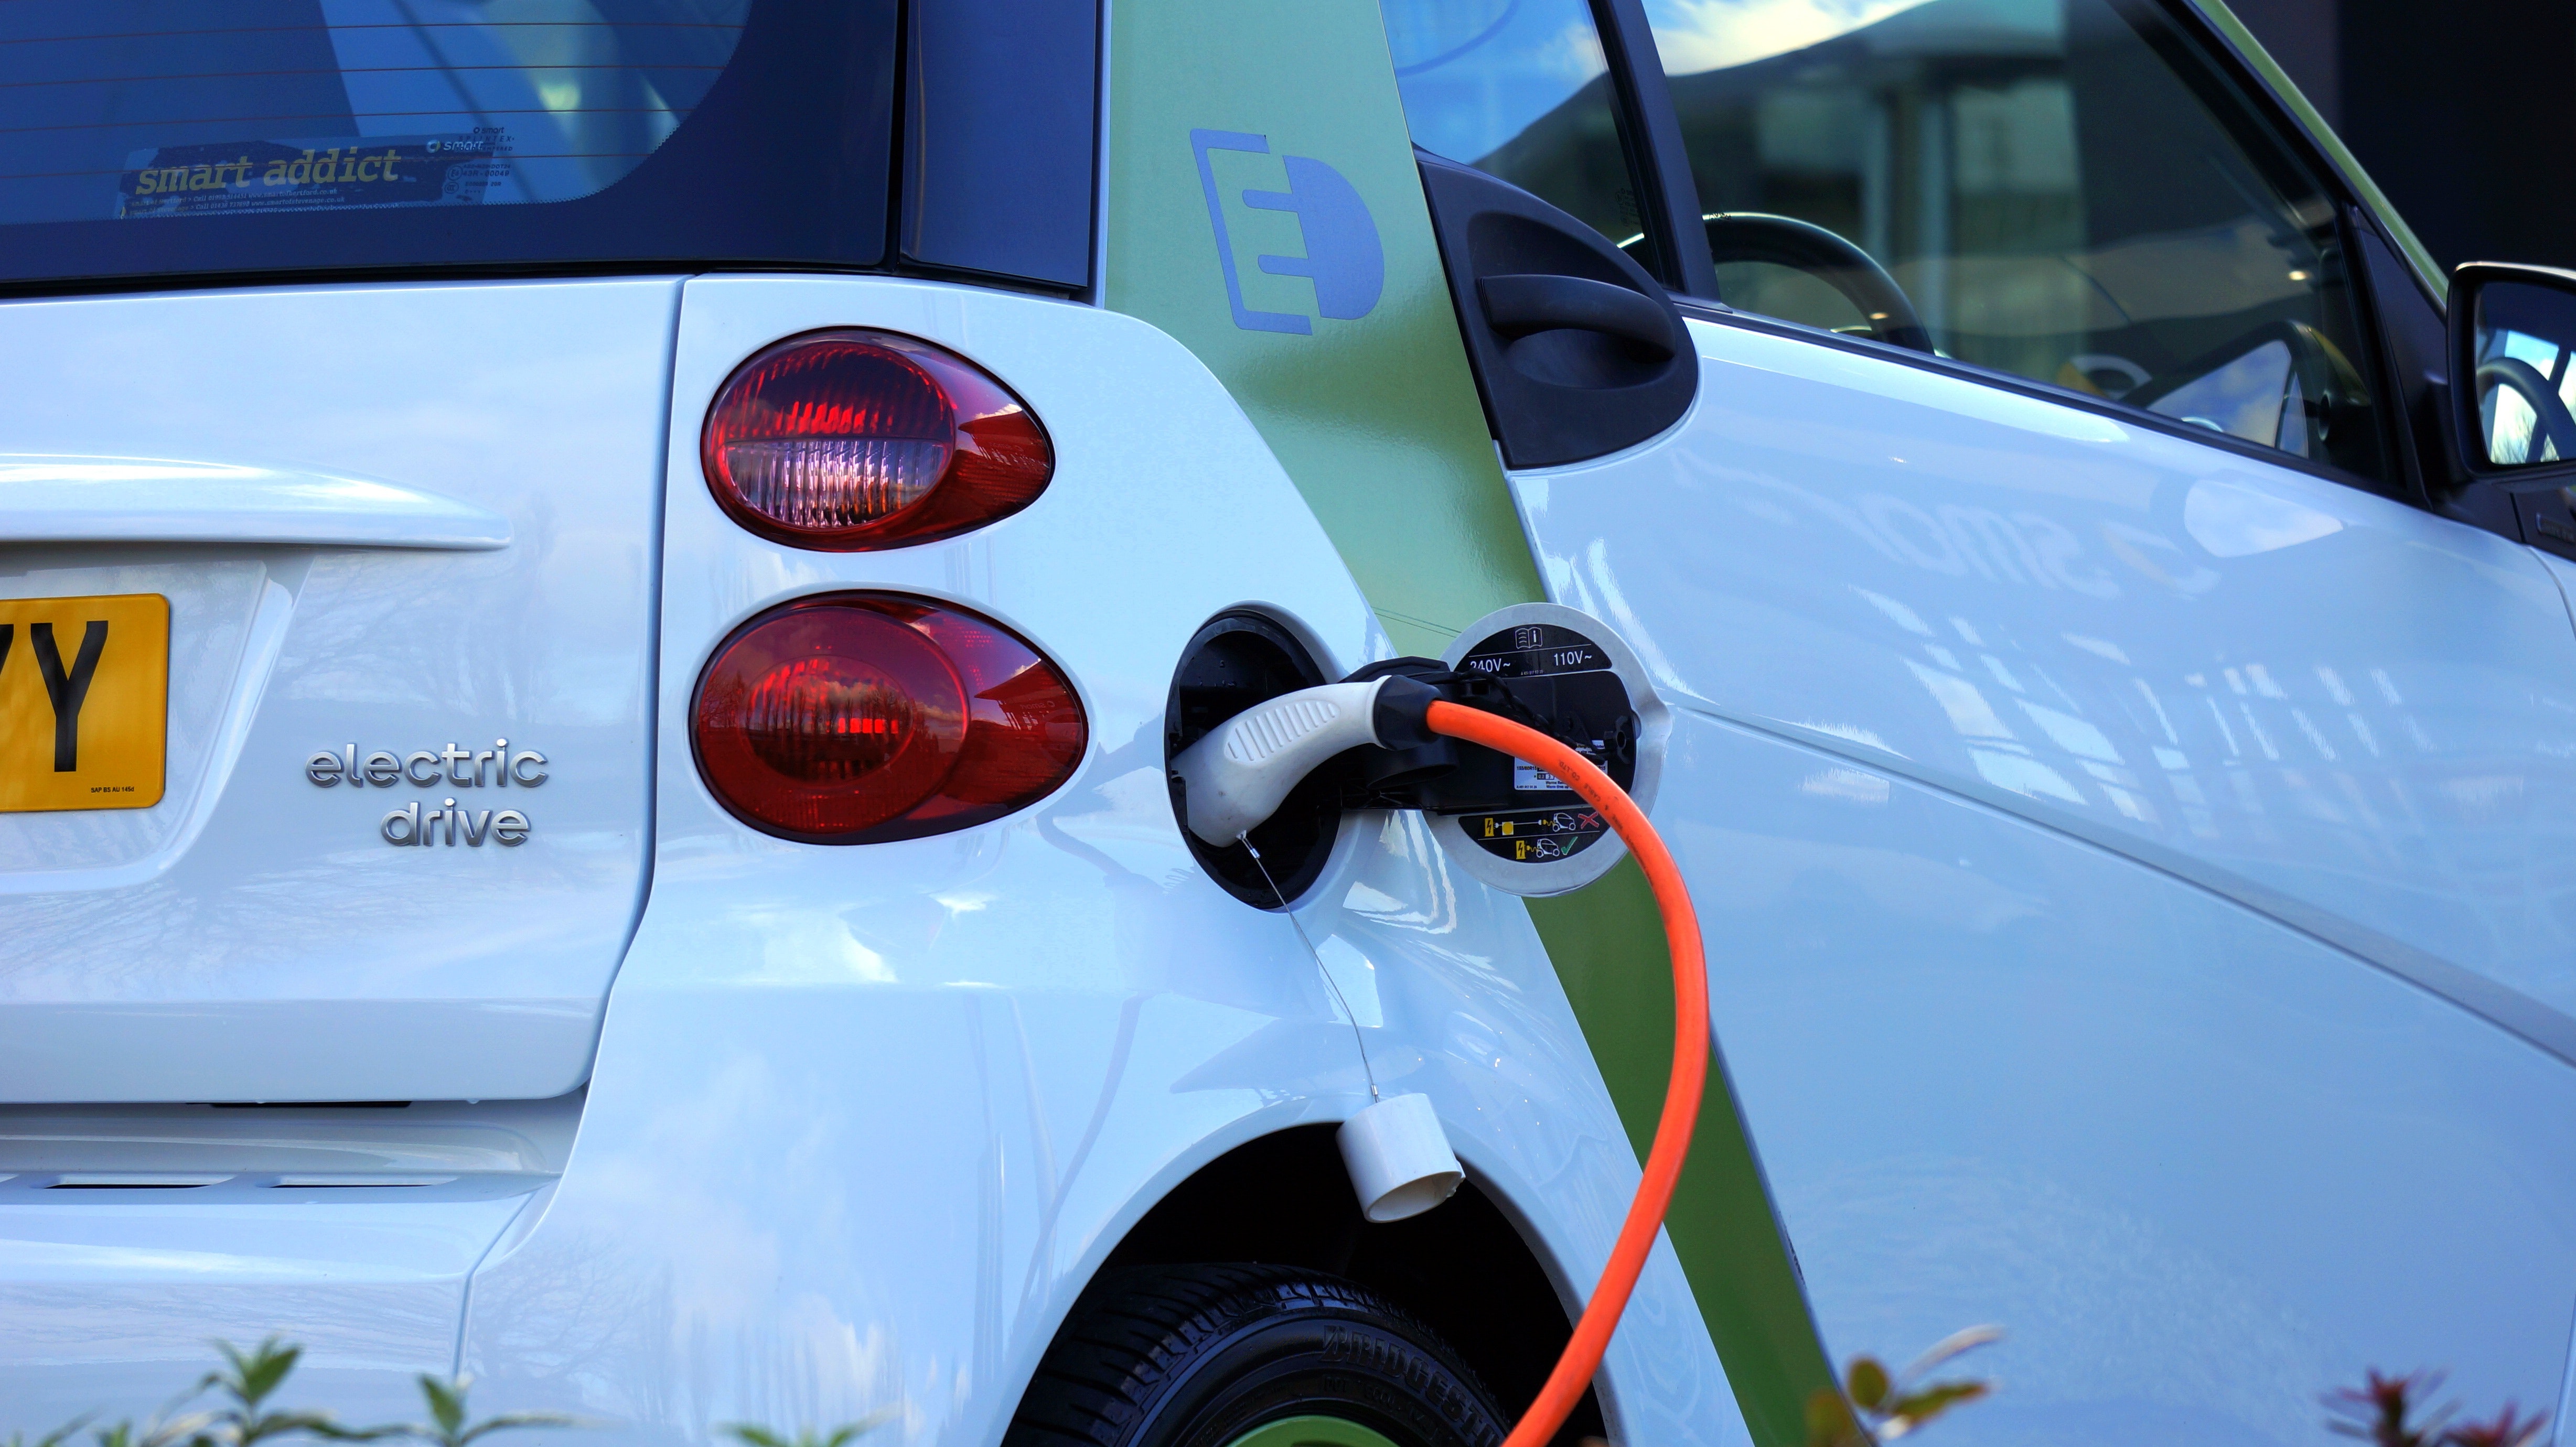 An electric vehicle bring charged. Photo via Mikes Photos / Pexels.